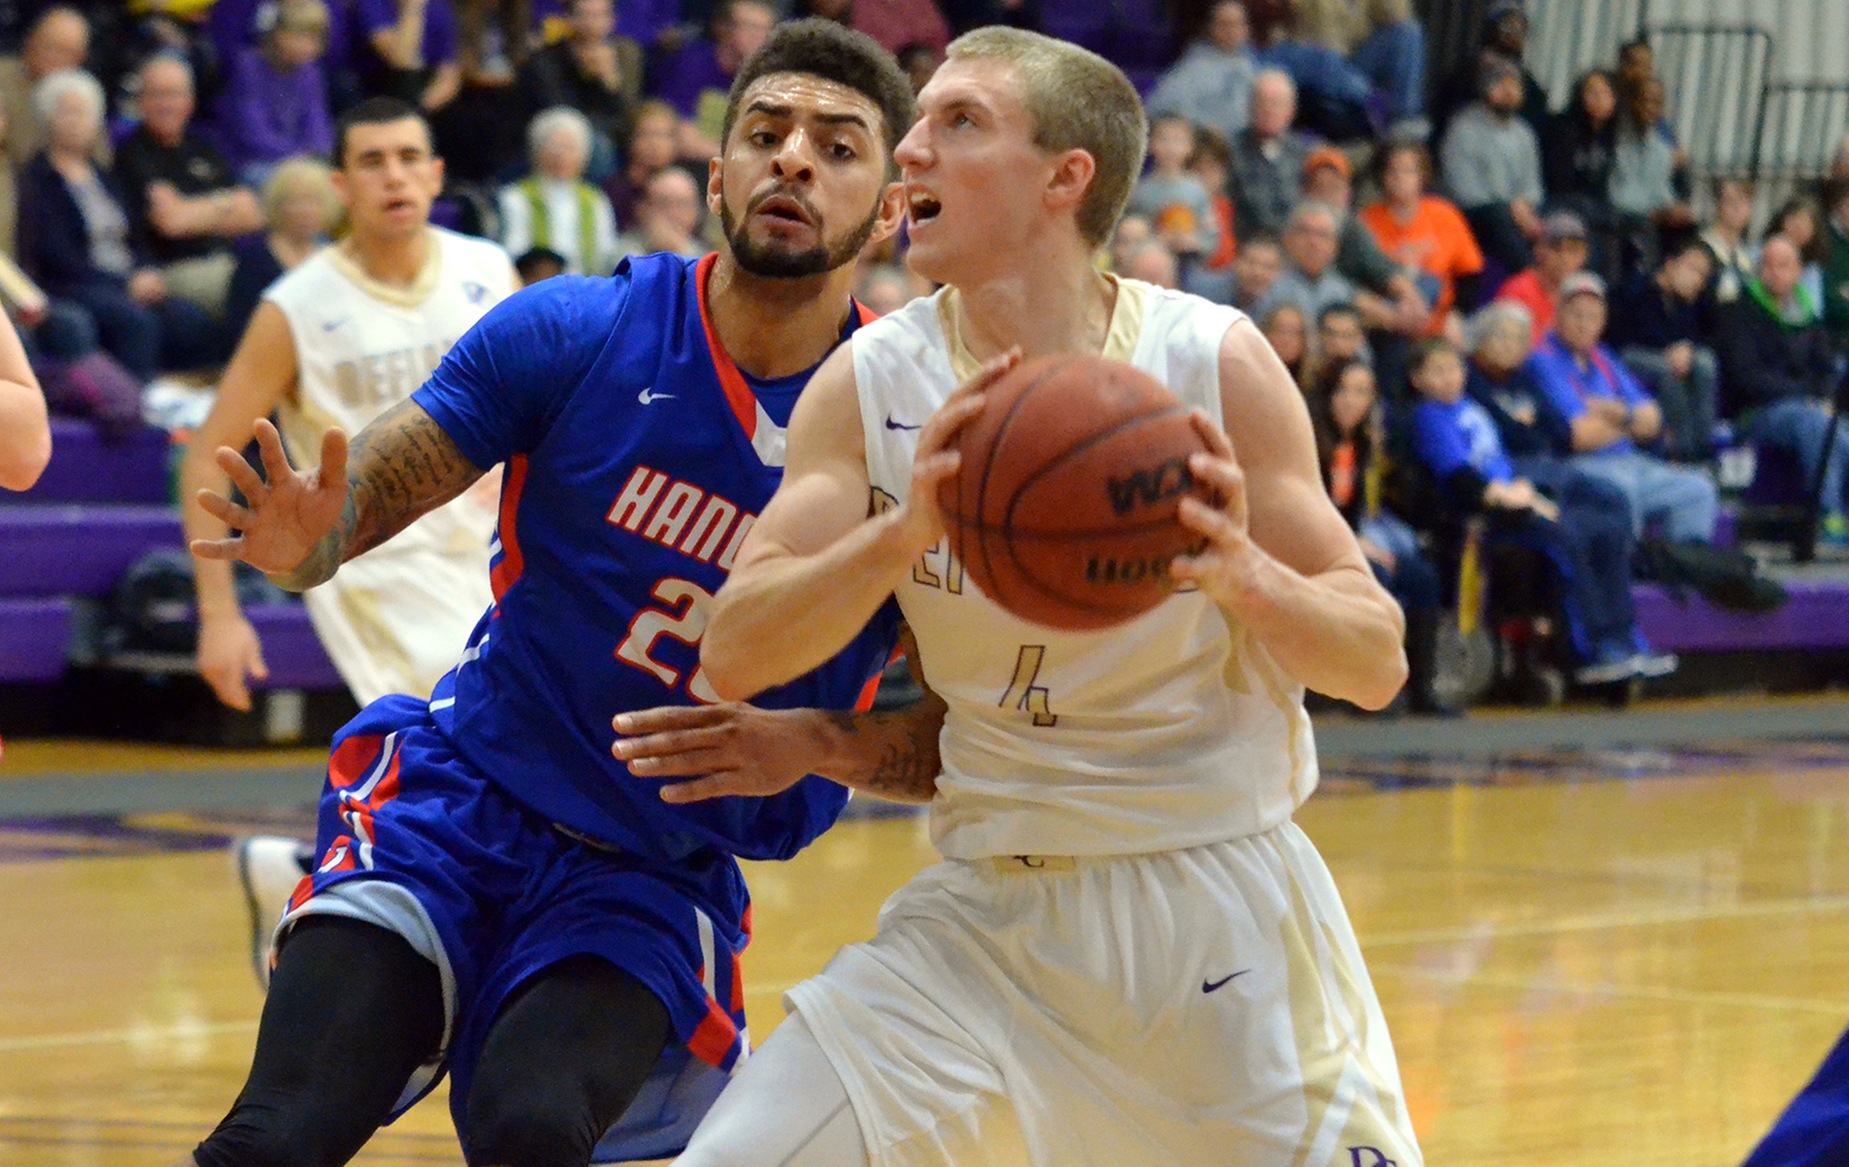 Men's Hoops Can't Overcome Hot First Half Shooting By MSJ